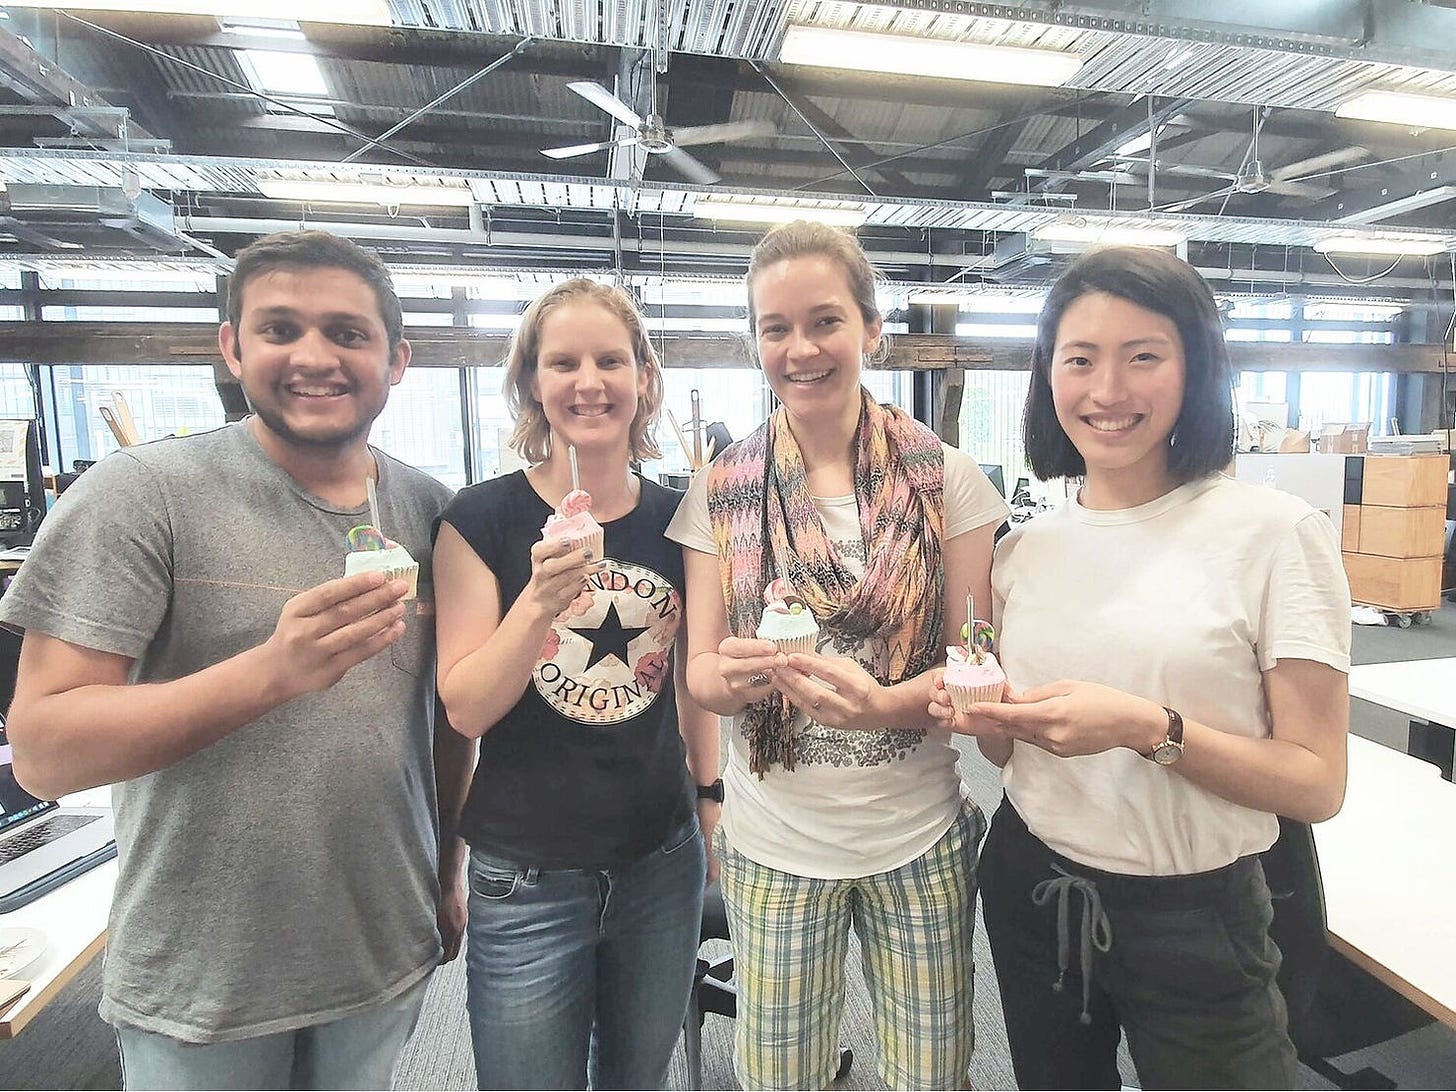 The Multitudes Founding Team (Left to Right): Vivek Katial, Emily Melhuish, Lauren Peate and Jenny Sahng.